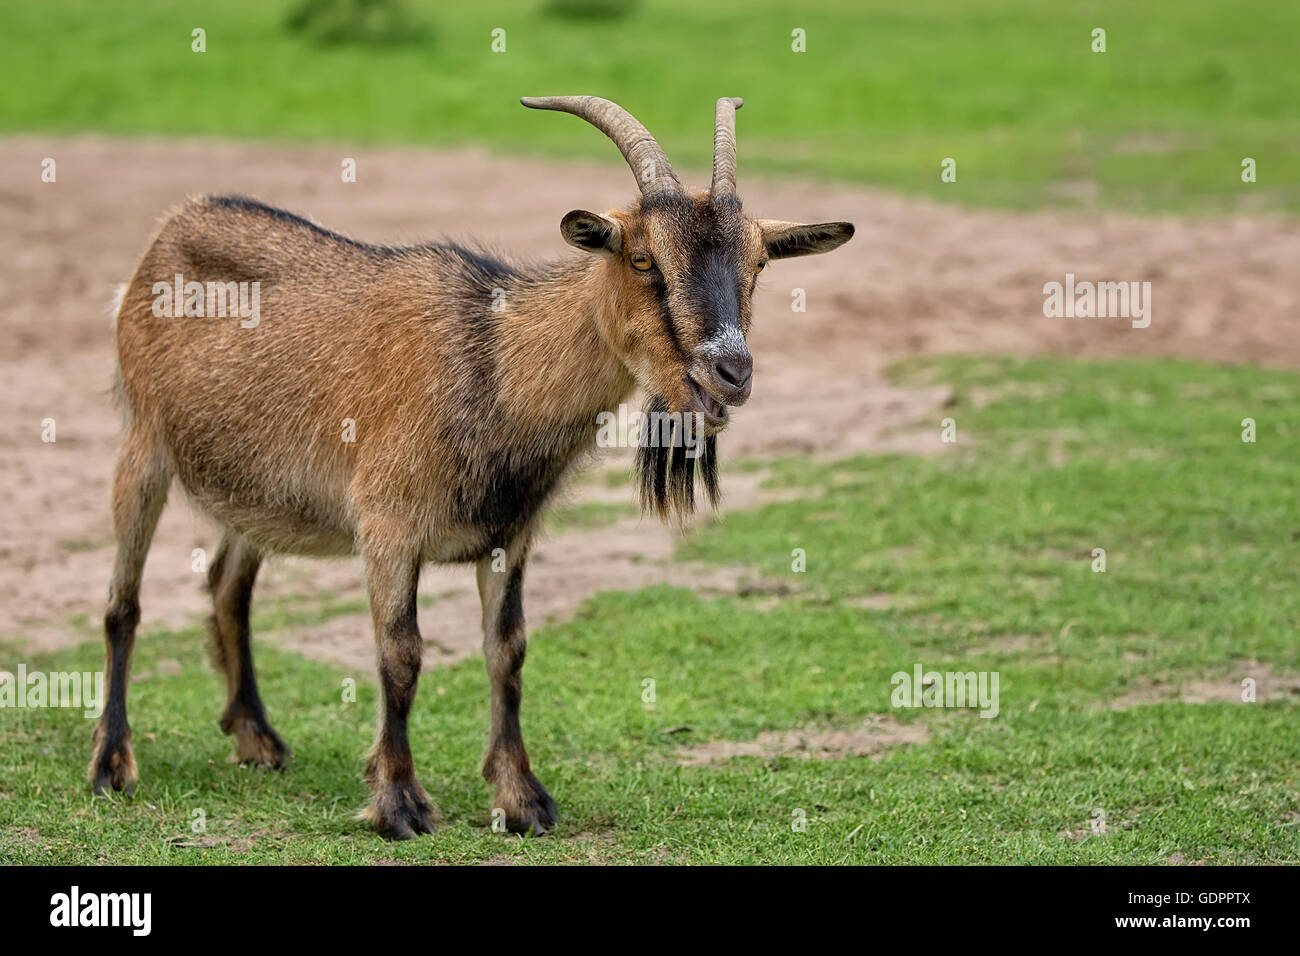 Goat in a clearing Stock Photo